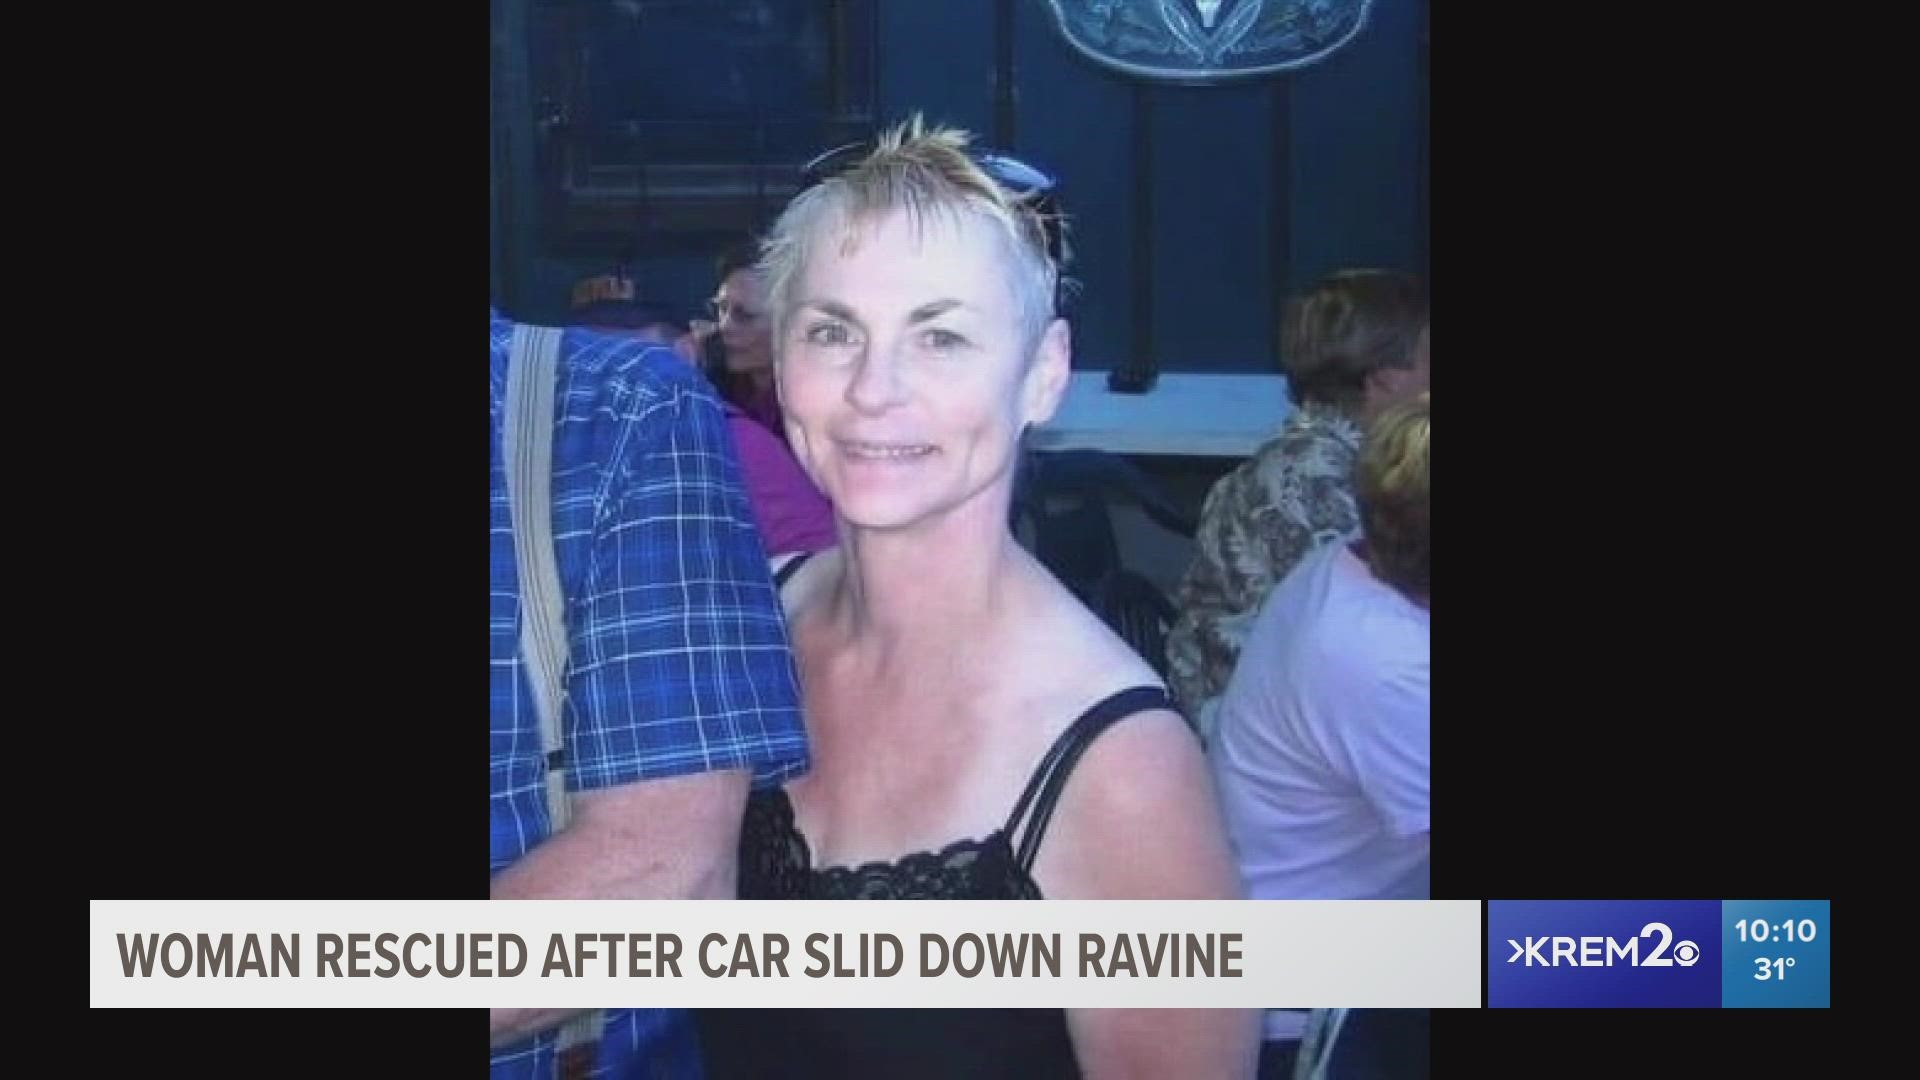 68-year-old Lynell McFarland was trapped for four days after her car slid down a ravine.